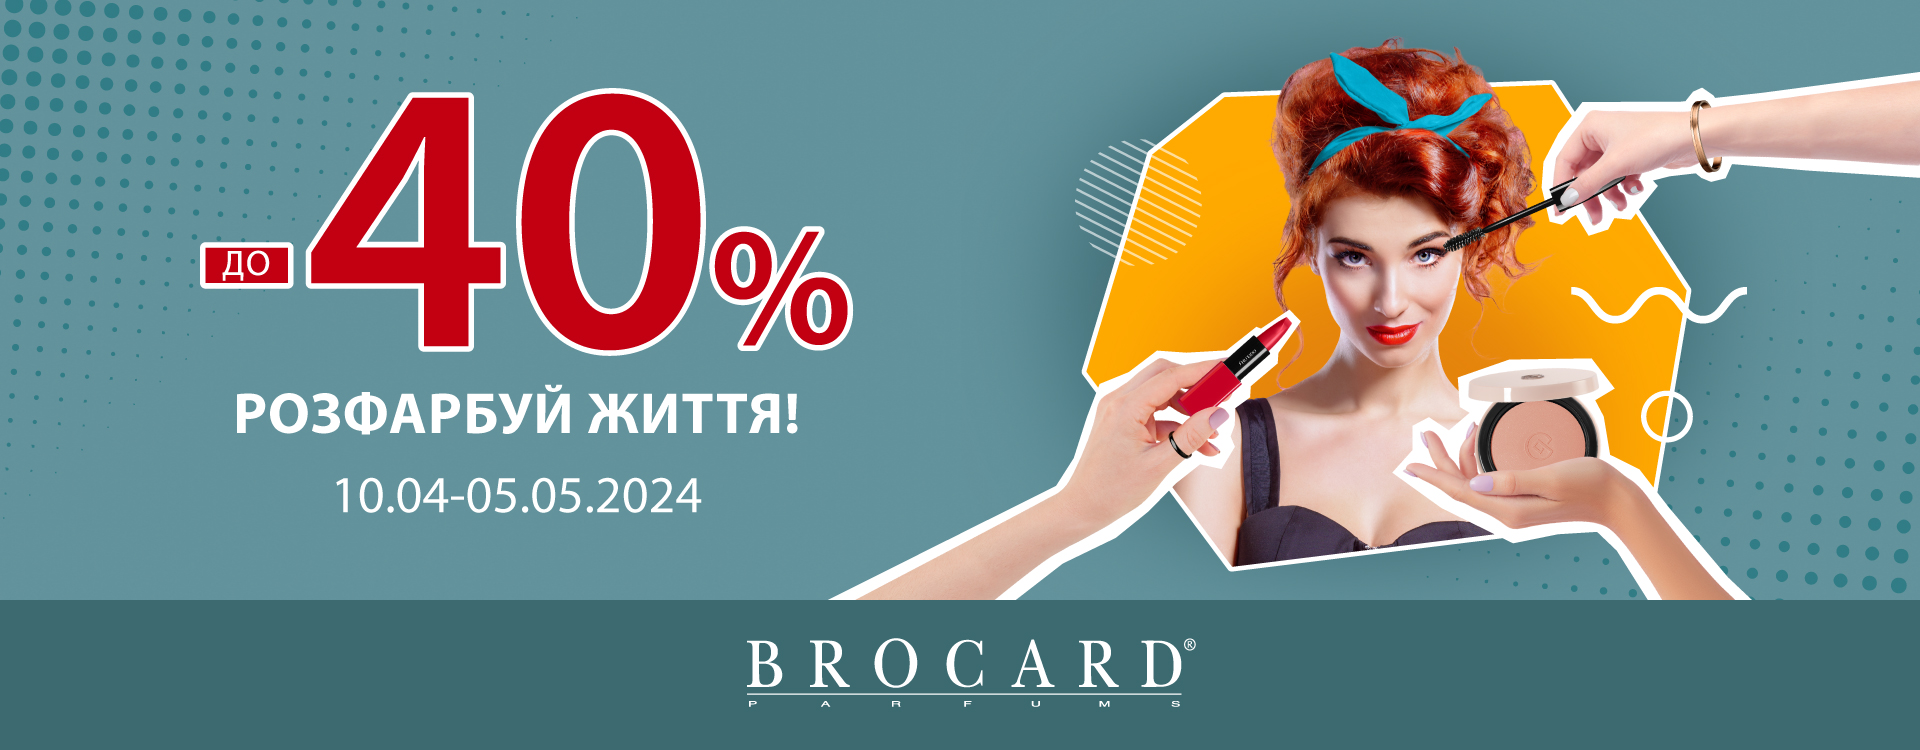 Color discounts up to 40% at BROCARD